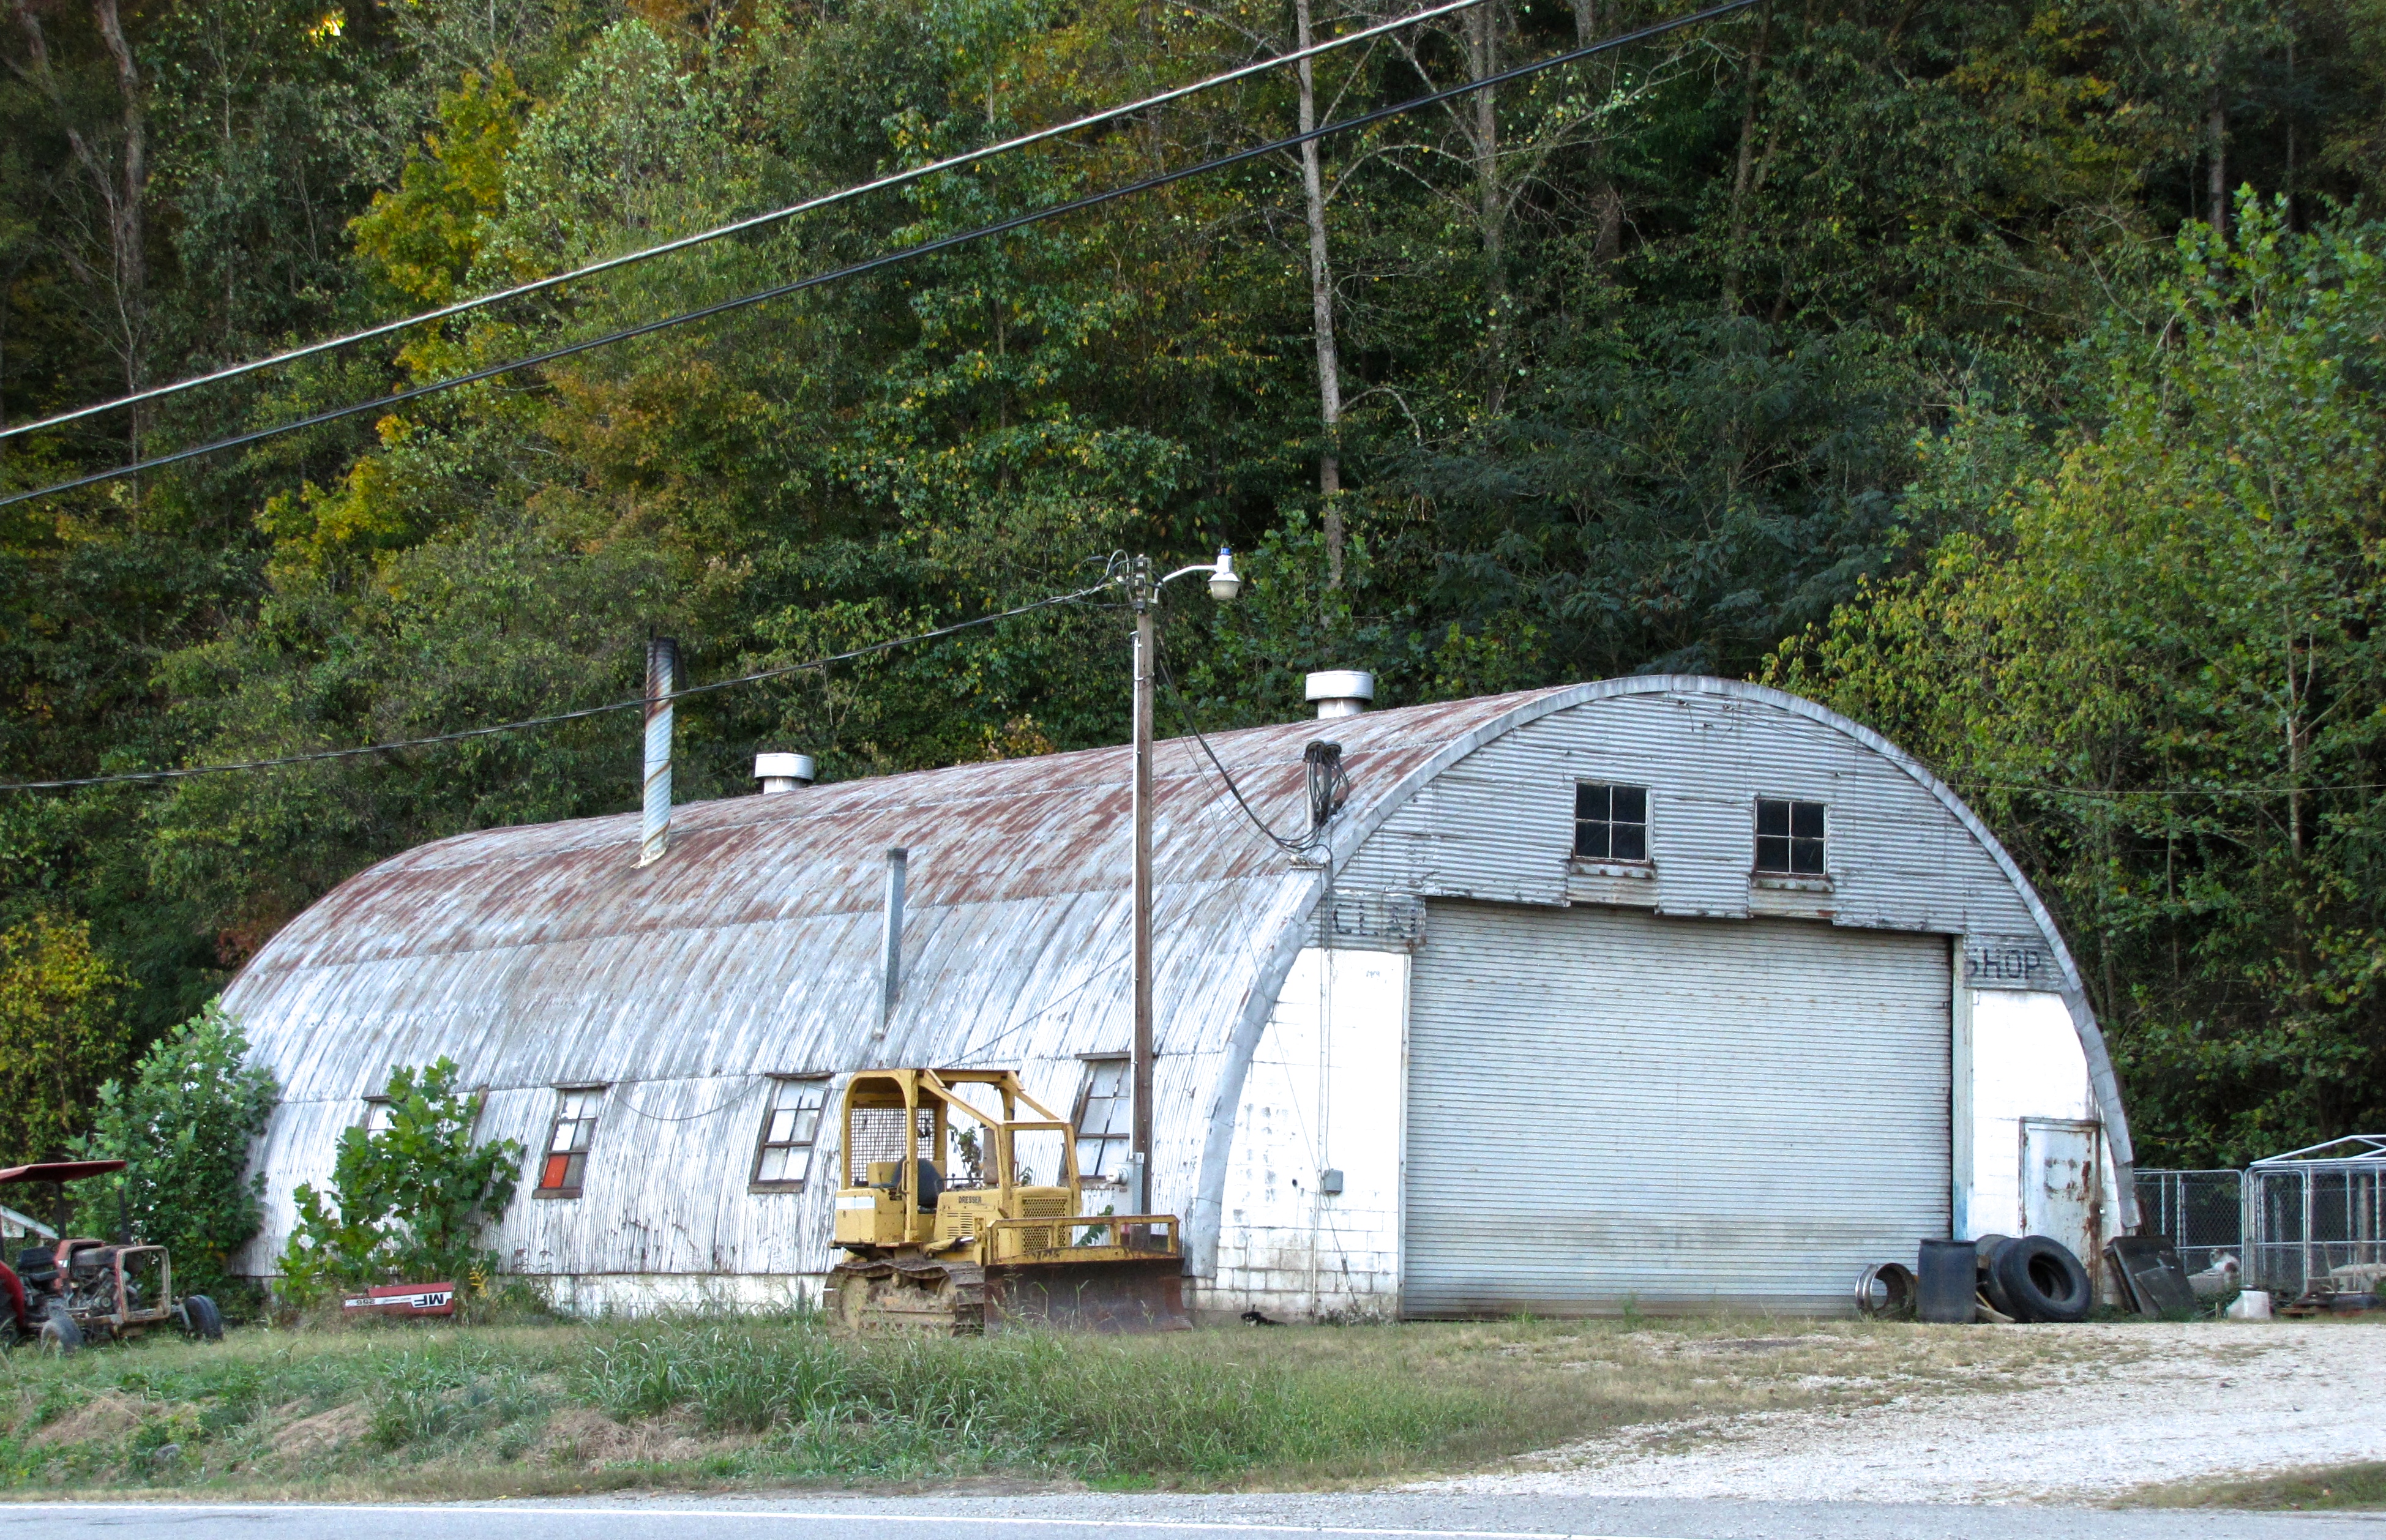 quonset hut in Riverdale, CA